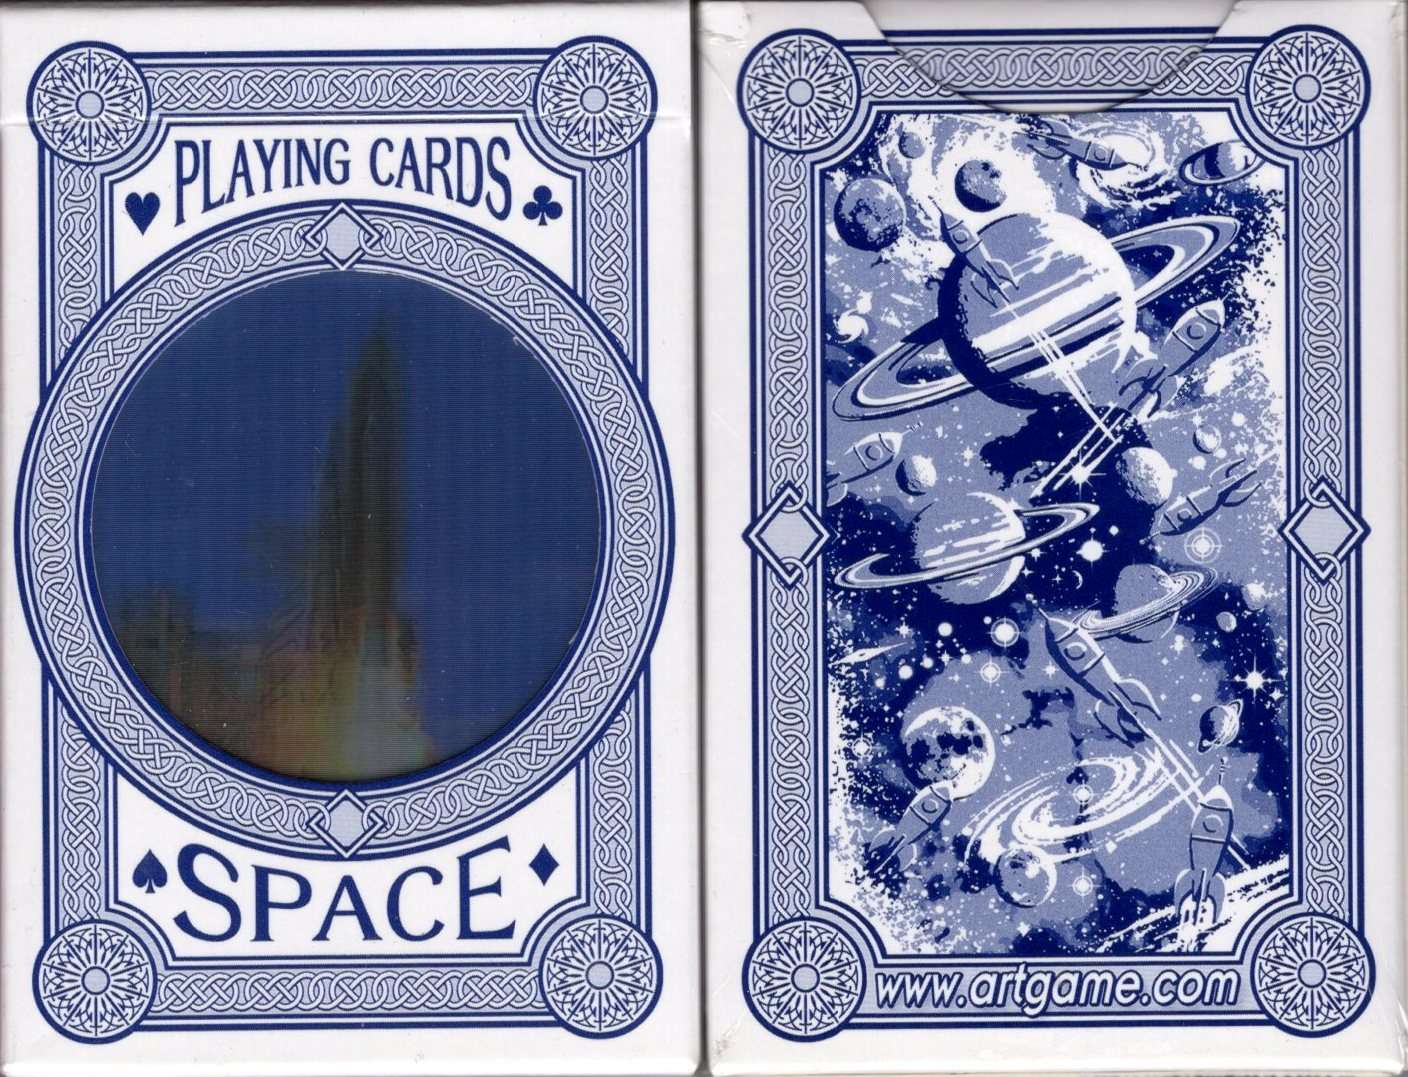 PlayingCardDecks.com-3D Playing Cards: Space